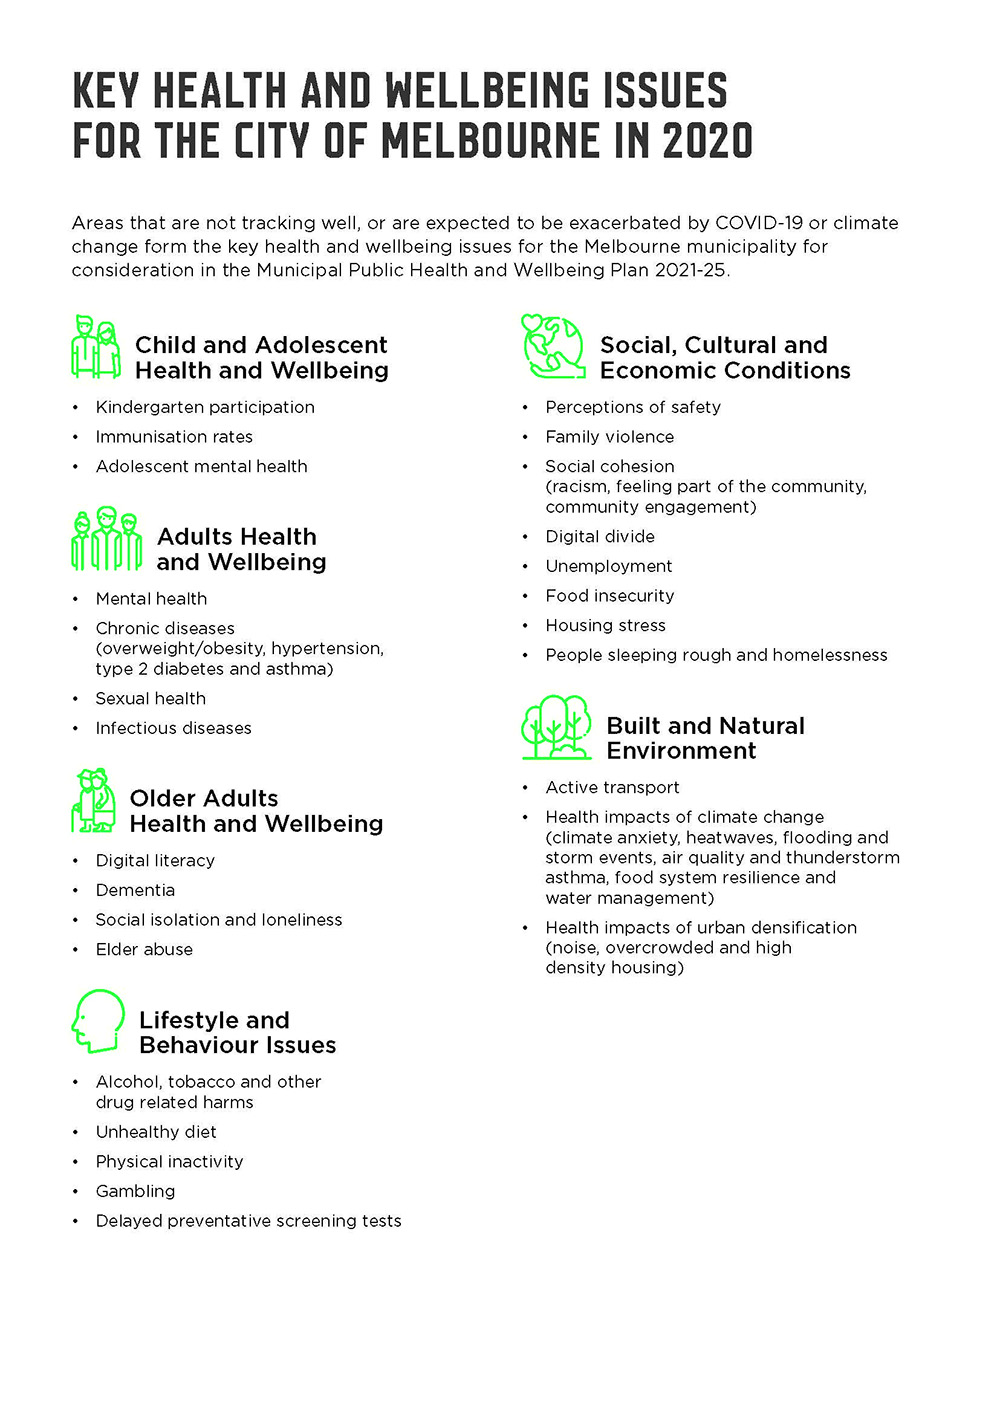 Infographic illustrating key health and wellbeing issues for the City of Melbourne in 2020